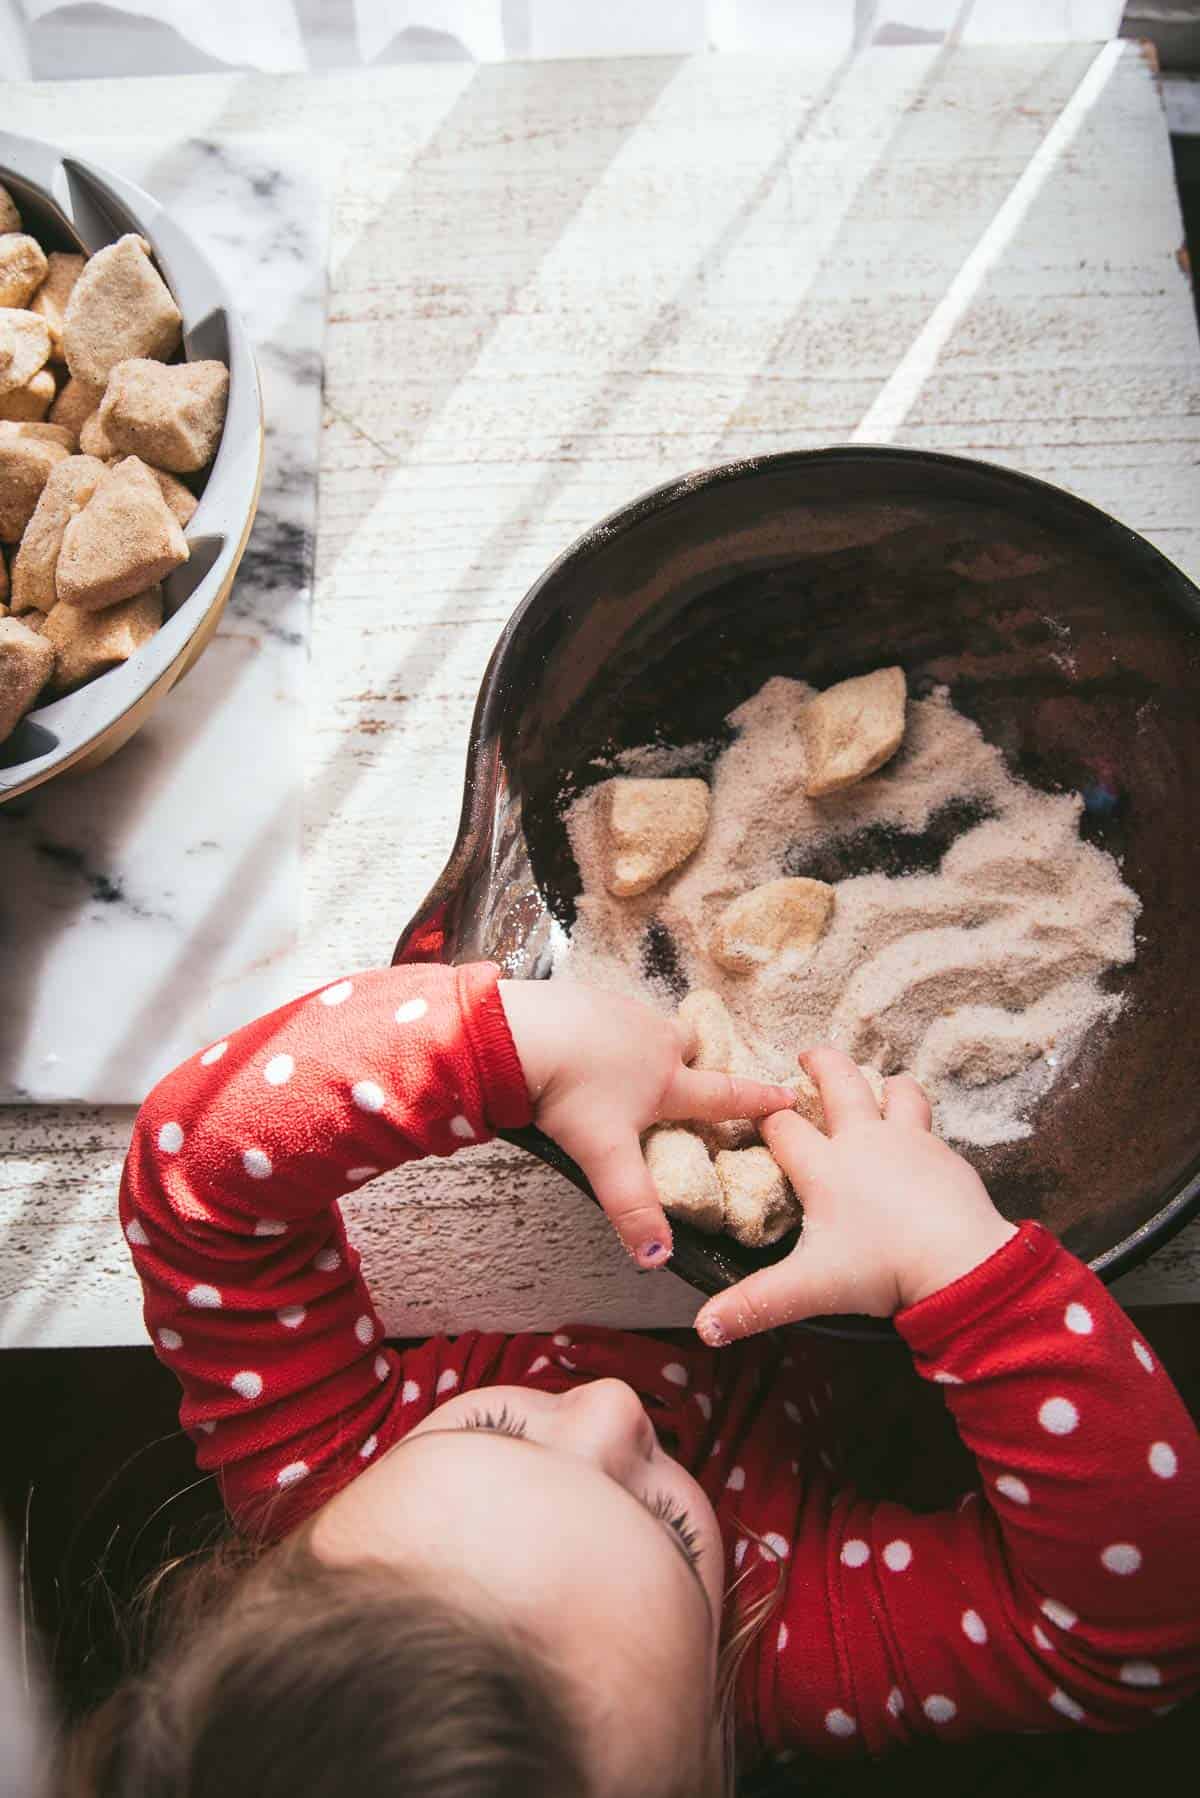 little kid putting sugared biscuits in a pan